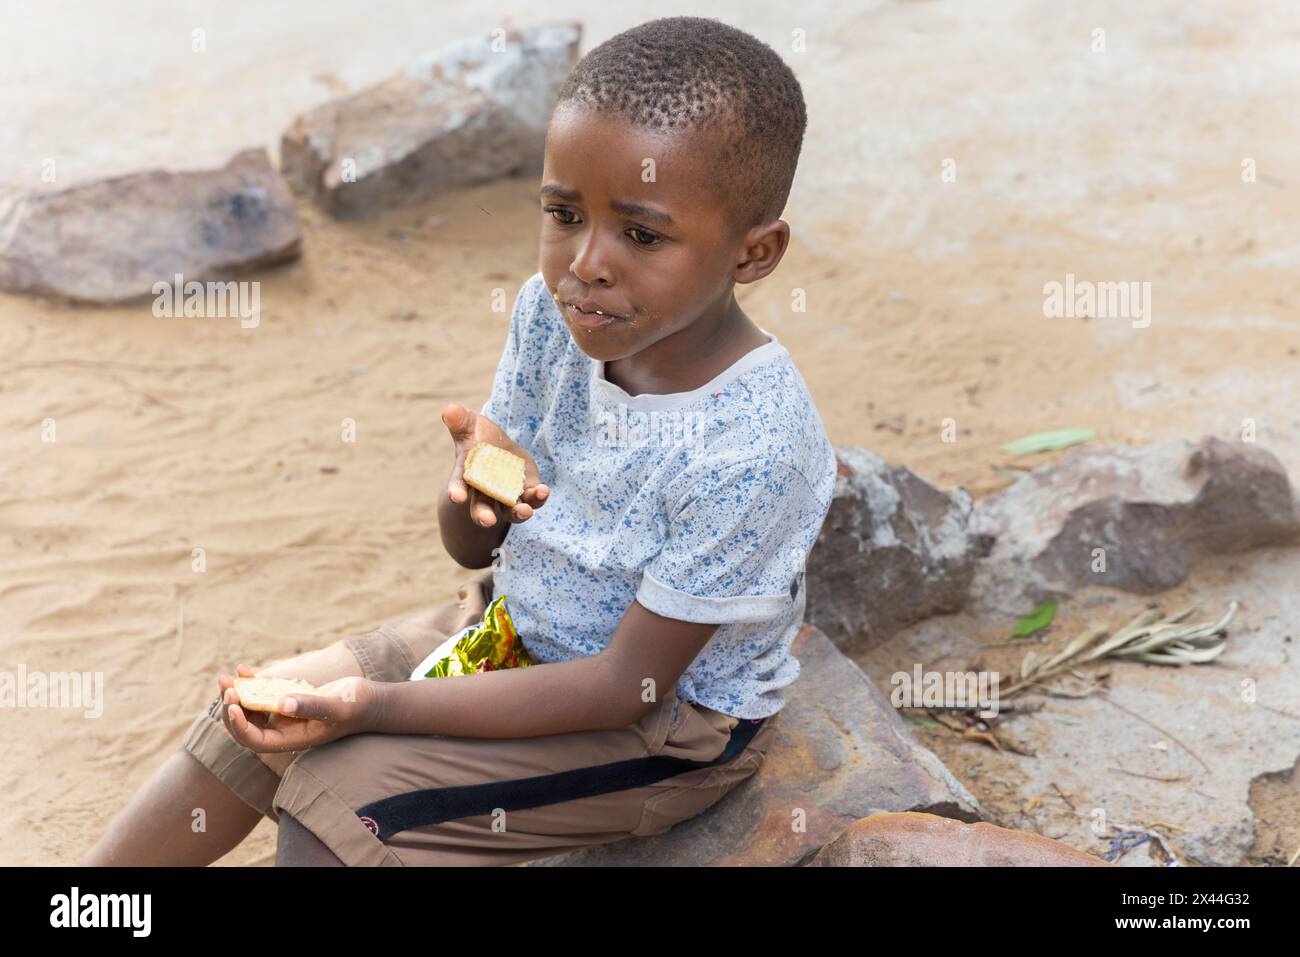 african village ,child snacking on biscuits and maize snacks sited on a stone in the yard Stock Photo